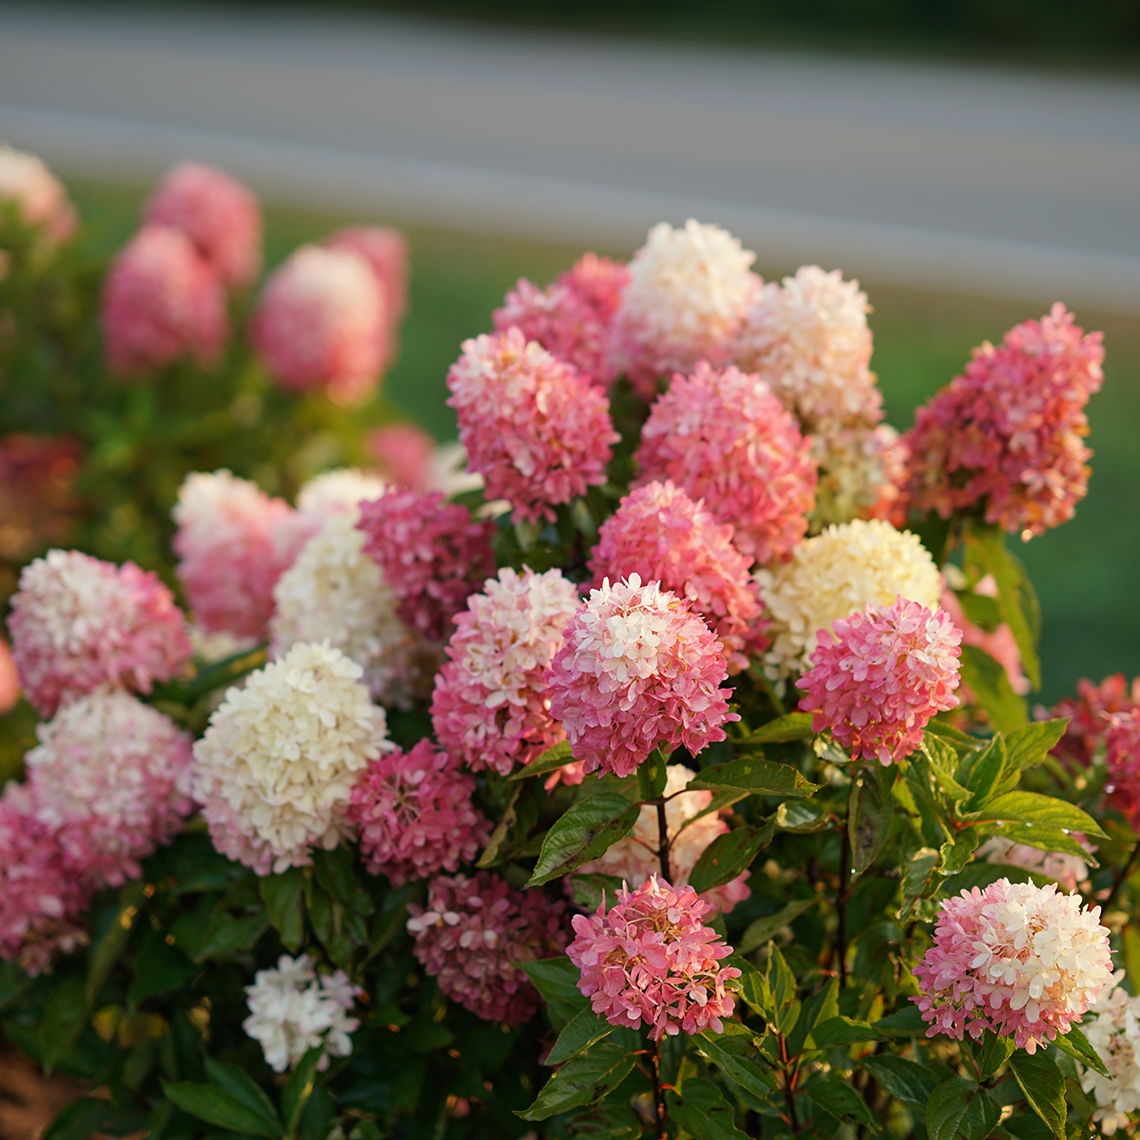 The pink and white mophead flowers of Zinfin Doll panicle hydrangea